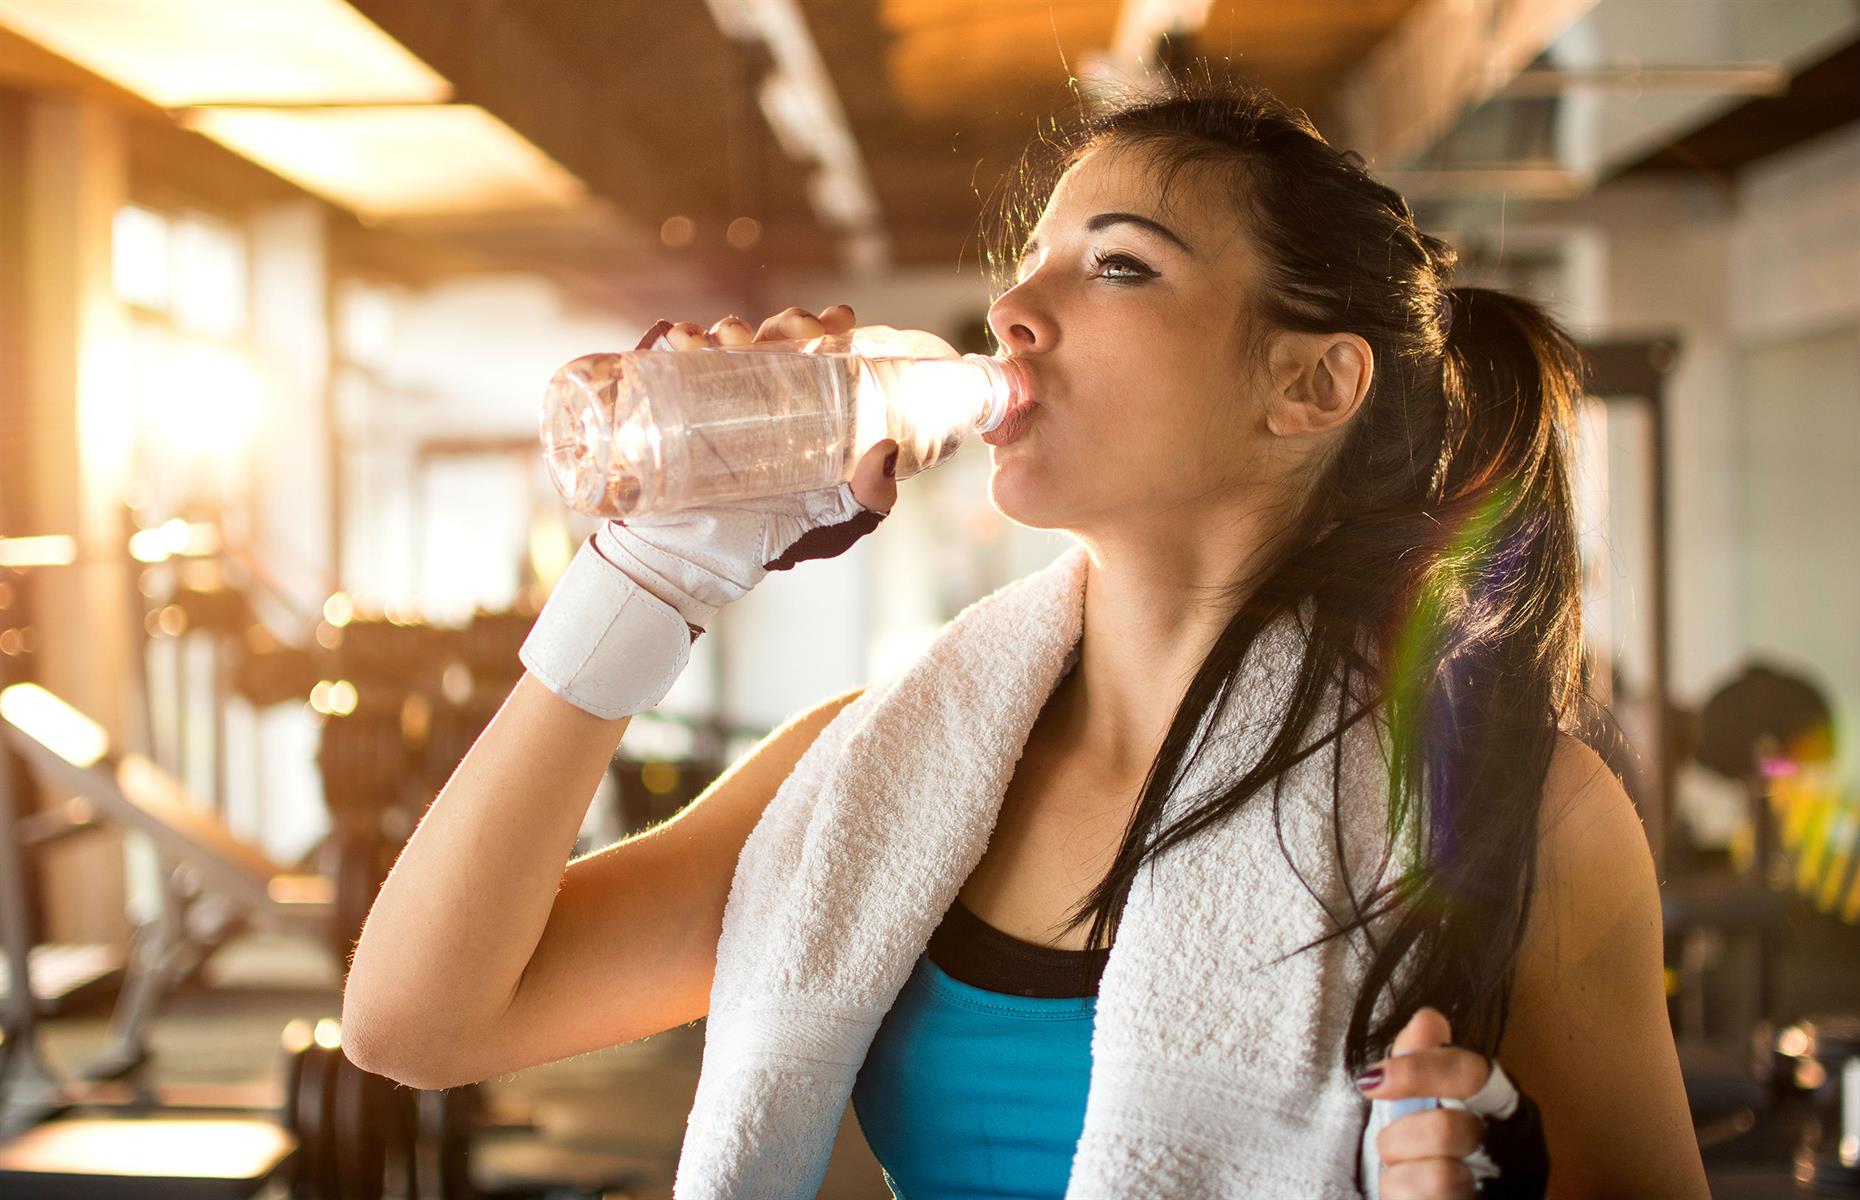 Exercise has health benefits; bottled water does not (image: Shutterstock)